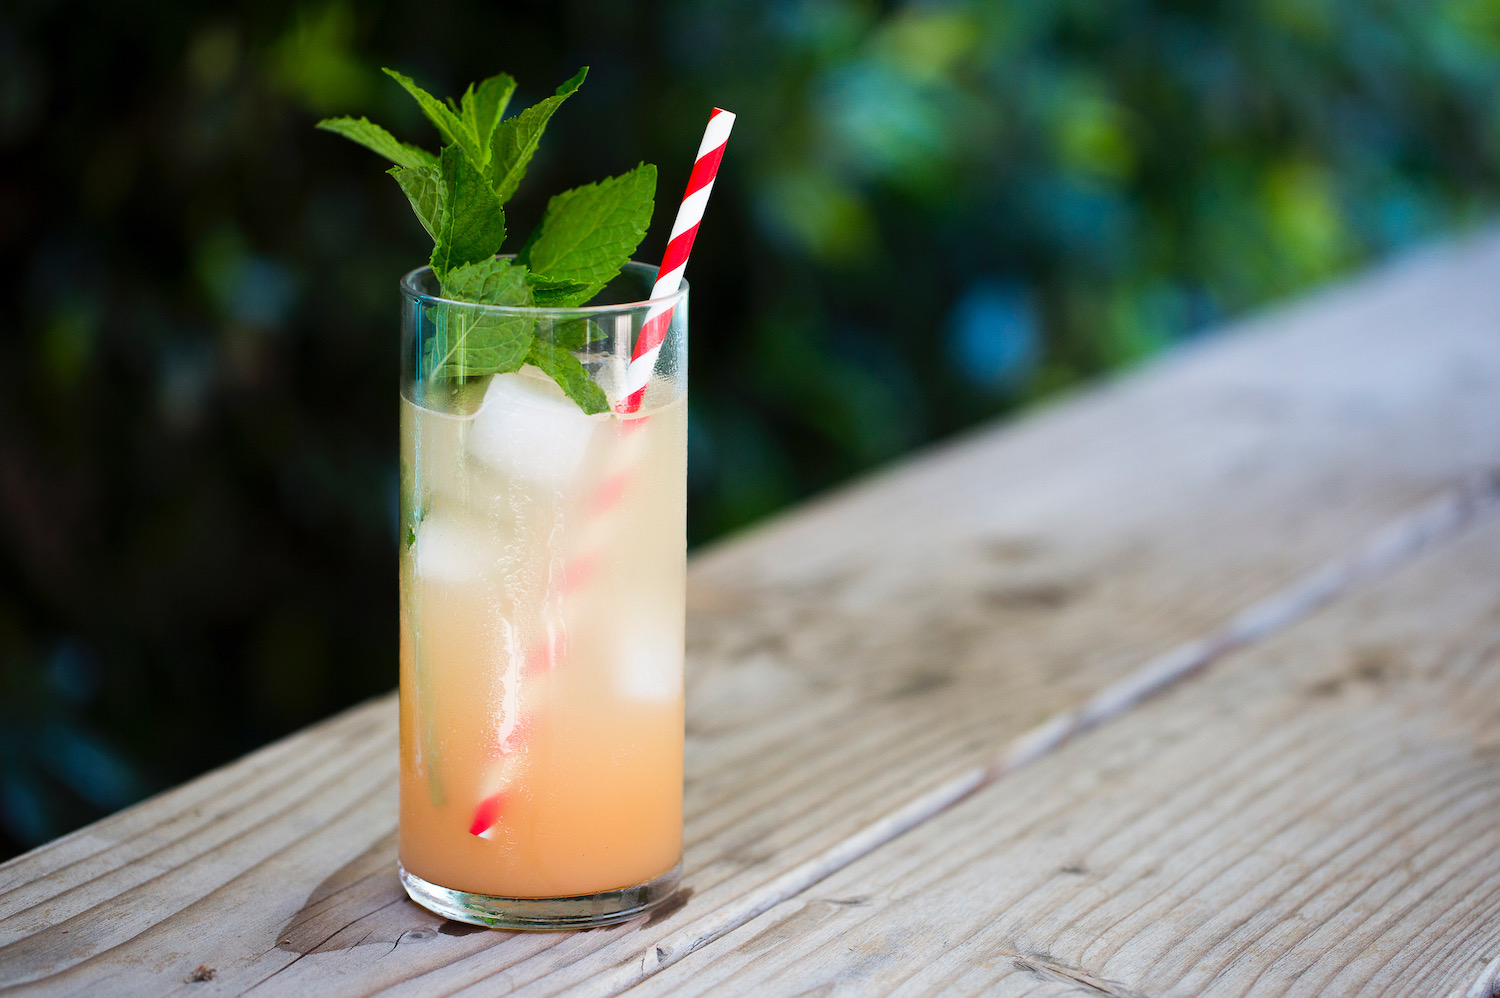 paloma cocktail with a mint sprig and striped red and white straw